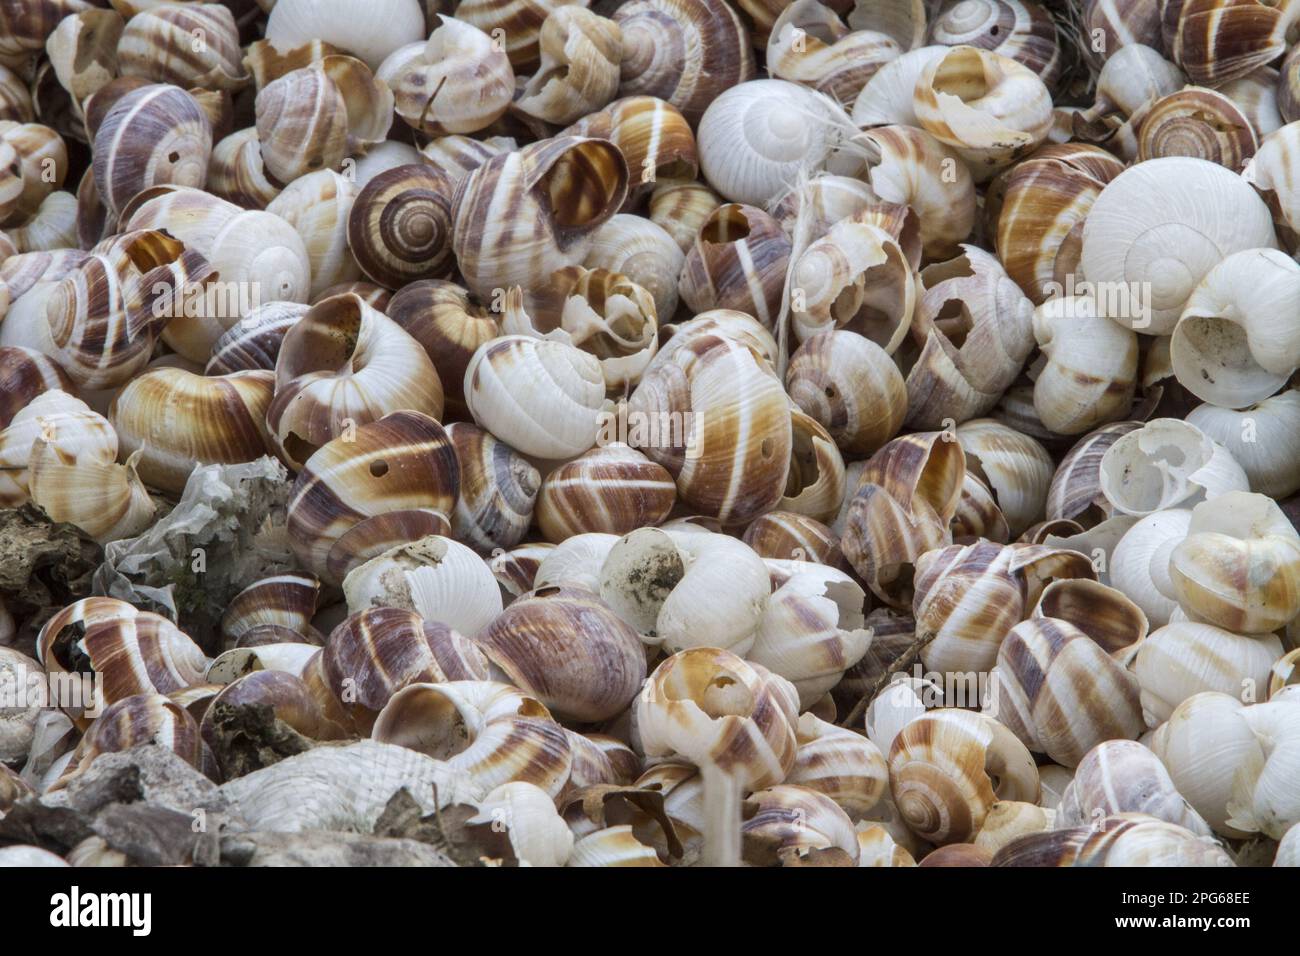 The shells of Helix lucorum are a species of large, edible, air-breathing land snails or slugs, a terrestrial lung snail of the family Helicidae. Stock Photo